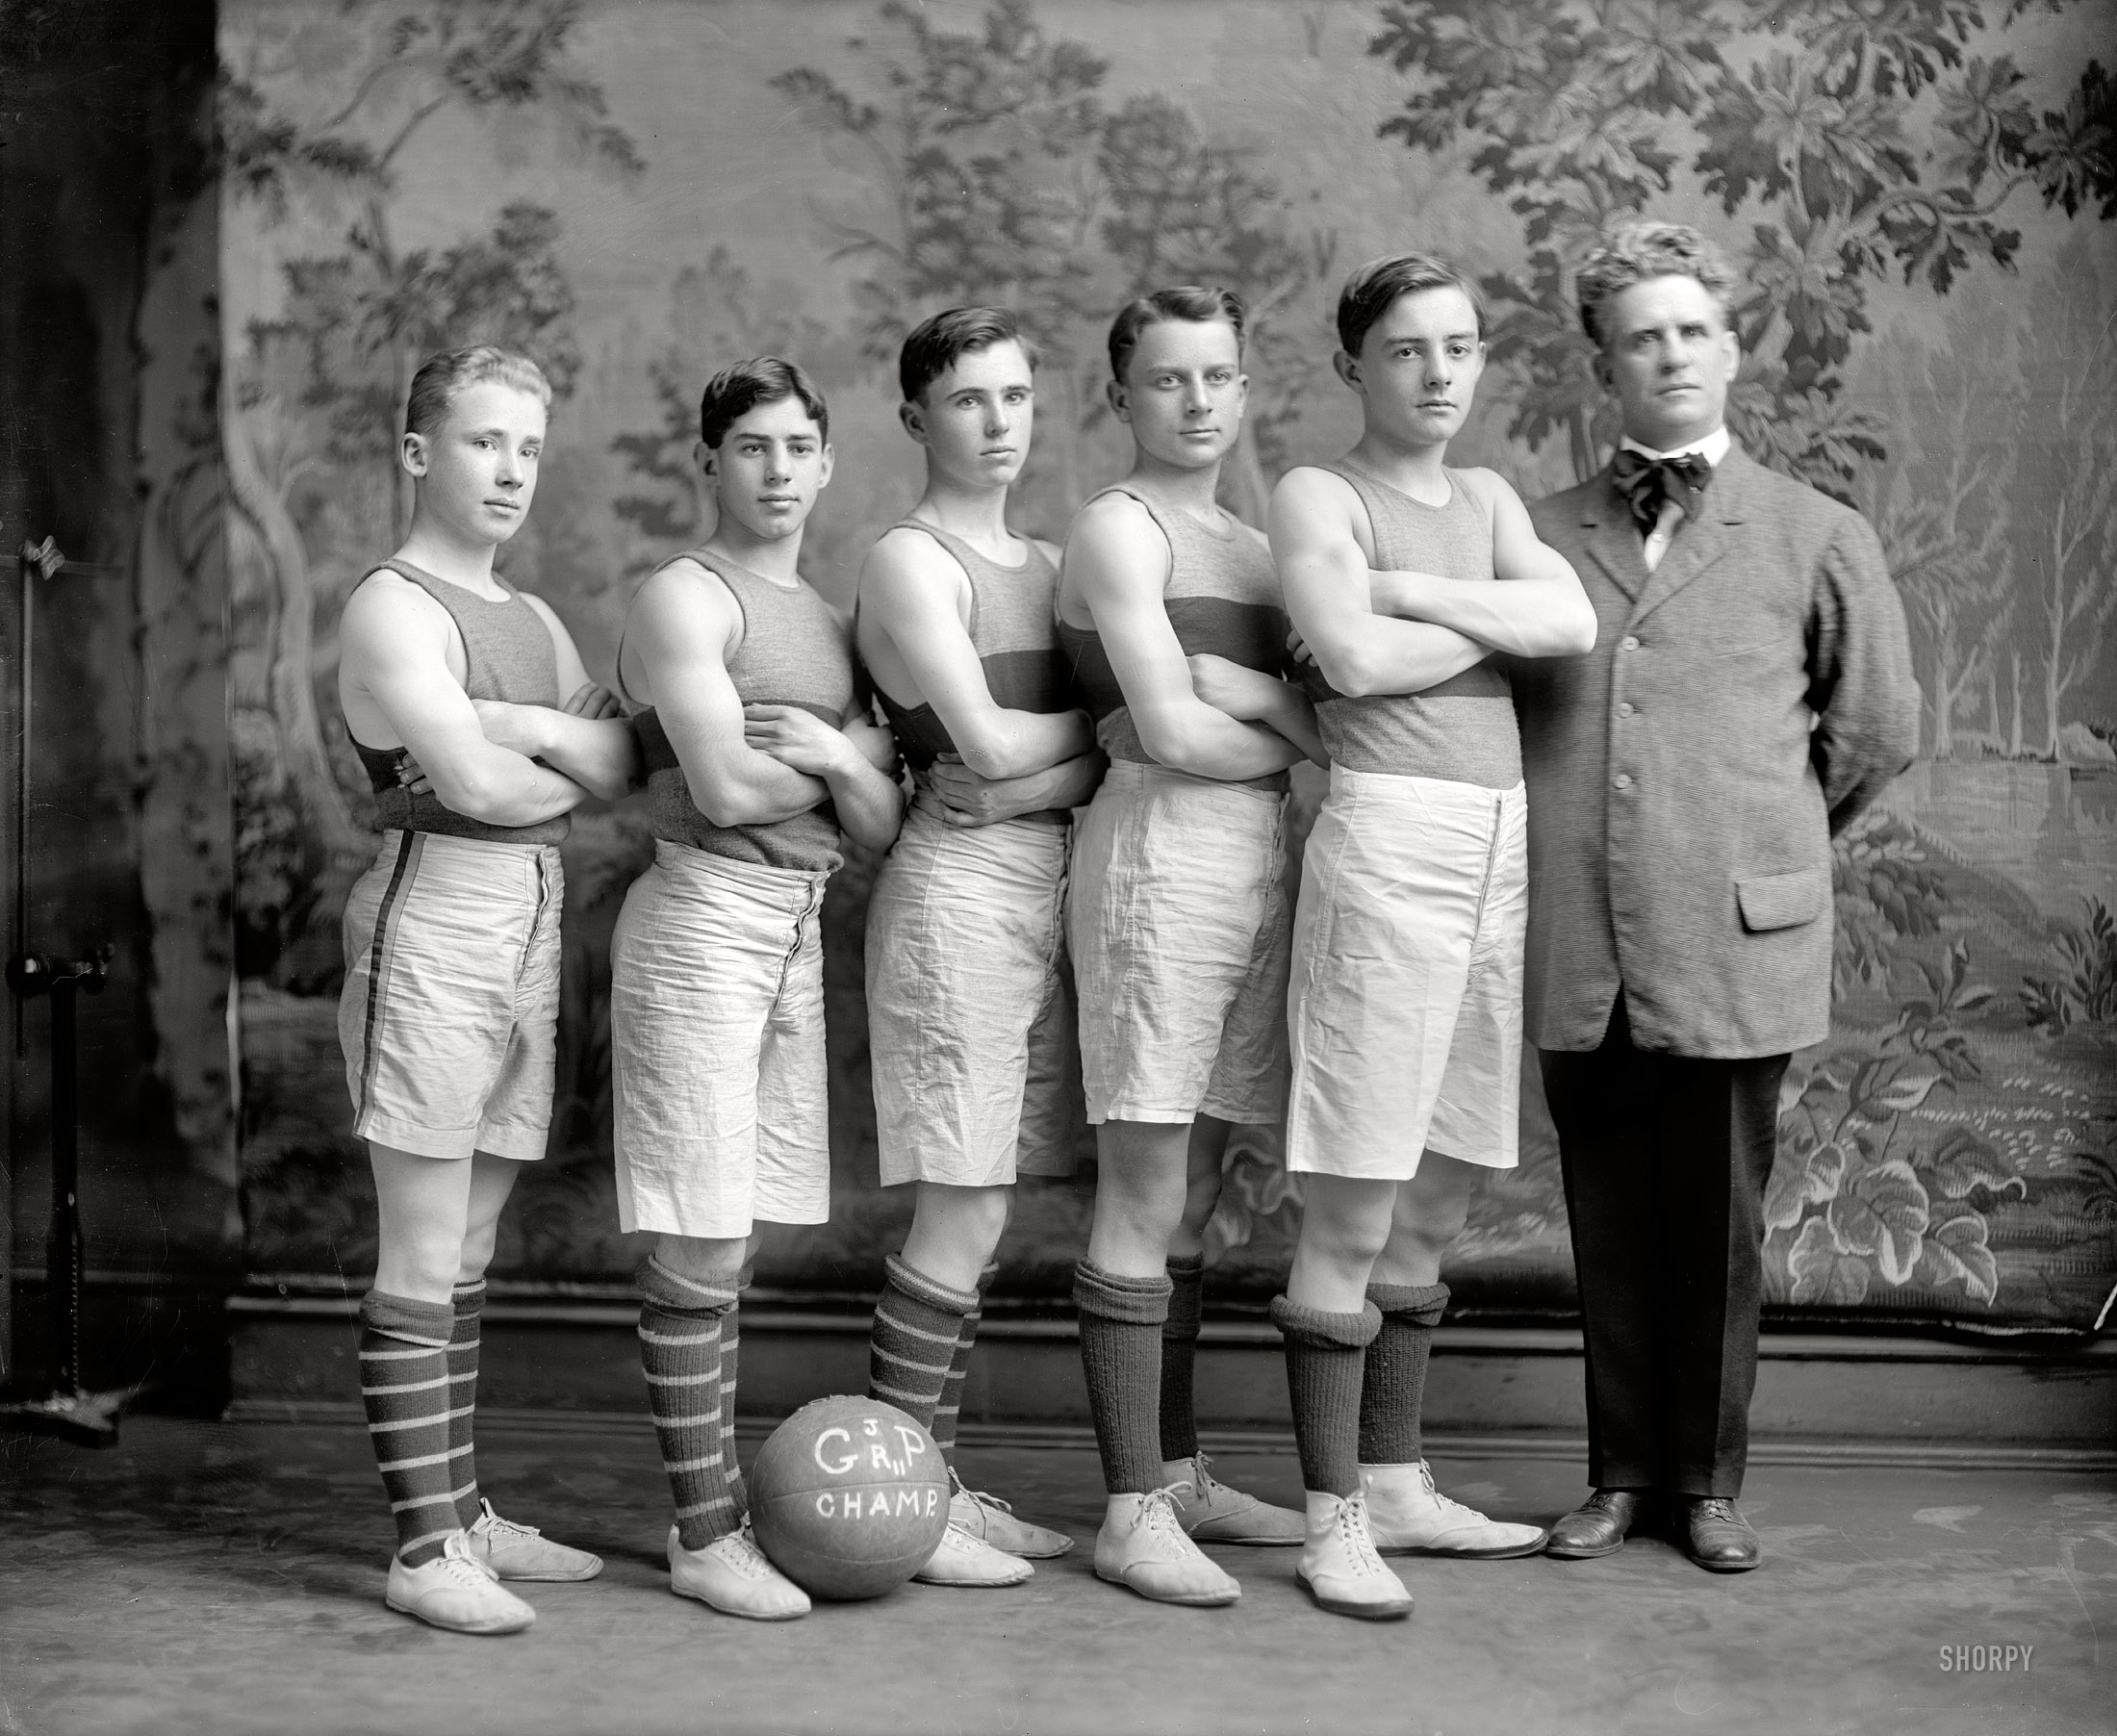 Washington, D.C., circa 1911. "Georgetown basketball." Our second look at the Georgetown Preparatory School JV squad. Harris & Ewing. View full size.